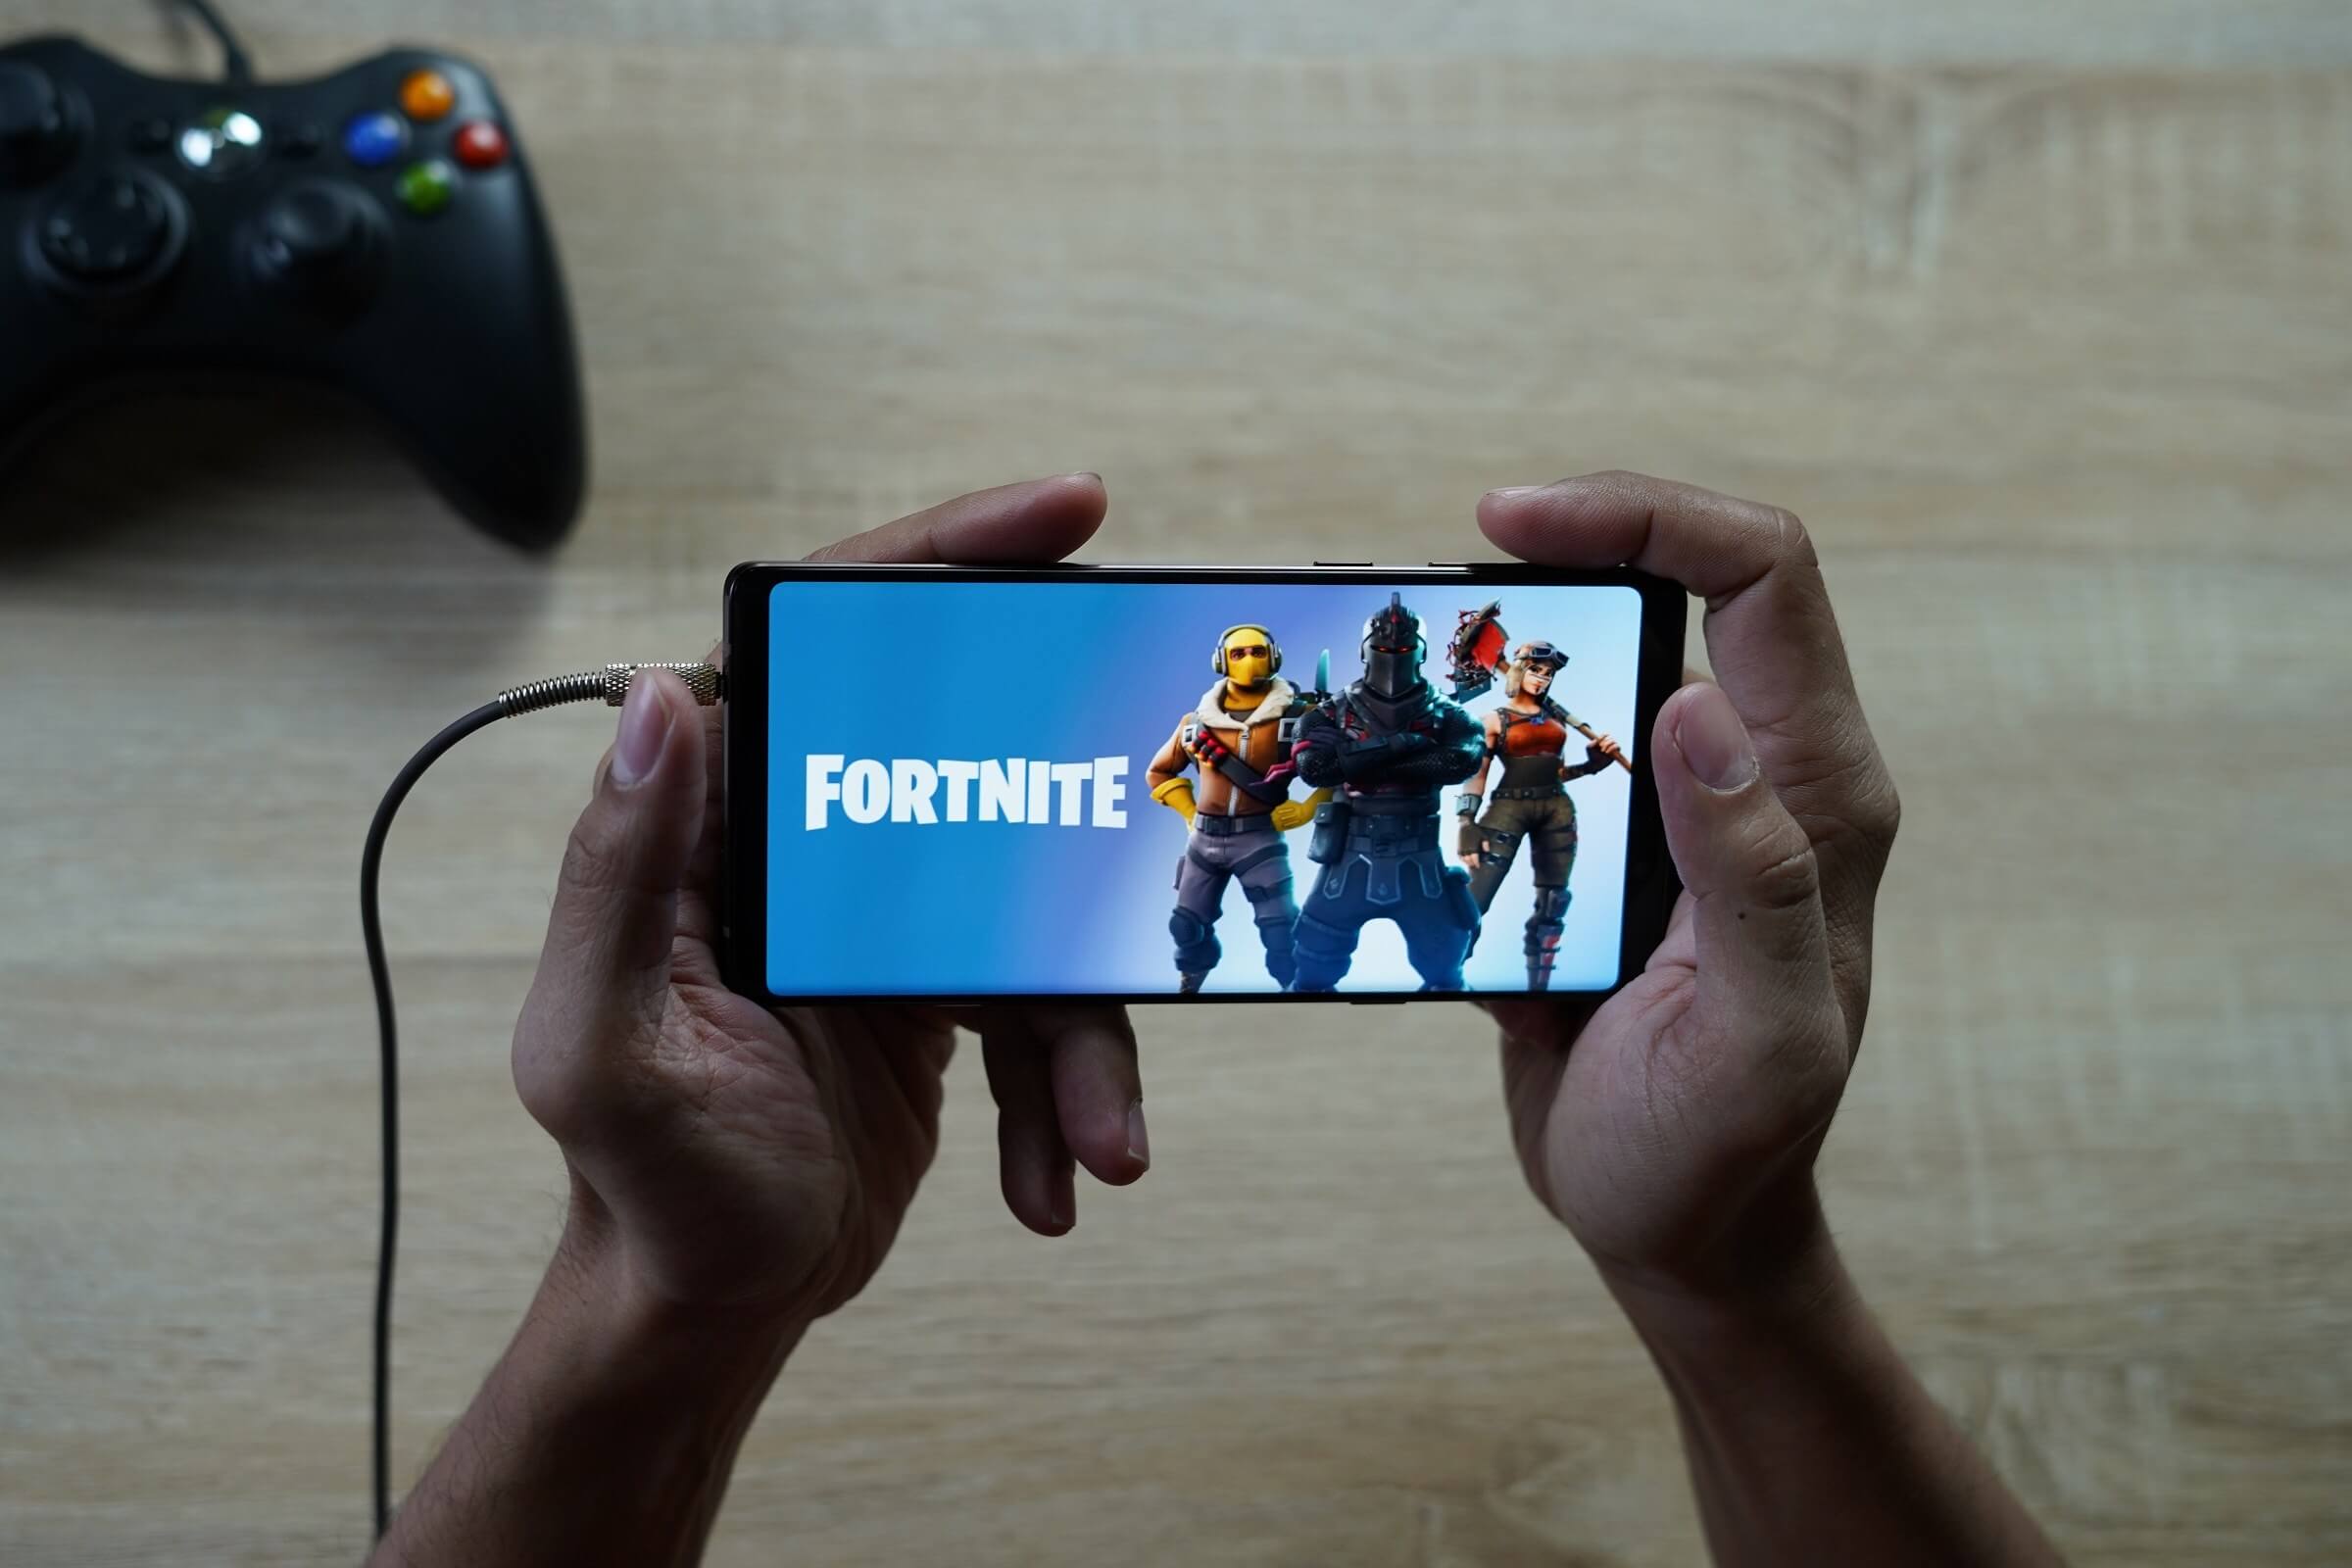 Got a OnePlus 8 handset? You can now play Fortnite Mobile at 90fps